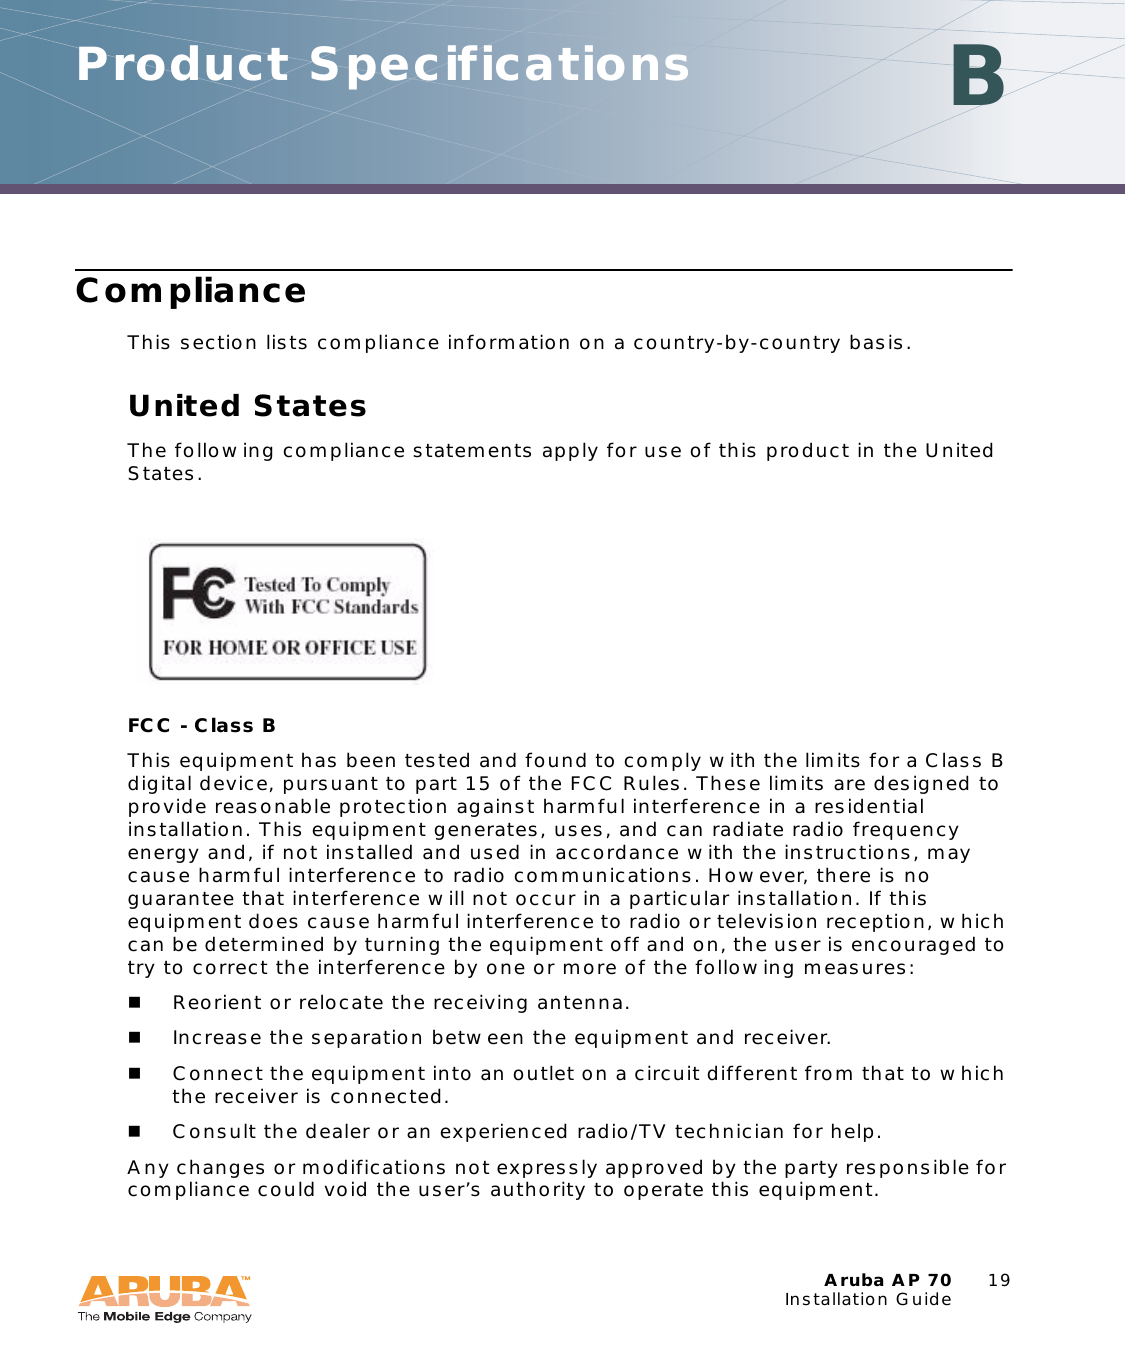 Aruba AP 70 19Installation GuideProduct Specifications BComplianceThis section lists compliance information on a country-by-country basis.United StatesThe following compliance statements apply for use of this product in the United States.FCC - Class B This equipment has been tested and found to comply with the limits for a Class B digital device, pursuant to part 15 of the FCC Rules. These limits are designed to provide reasonable protection against harmful interference in a residential installation. This equipment generates, uses, and can radiate radio frequency energy and, if not installed and used in accordance with the instructions, may cause harmful interference to radio communications. However, there is no guarantee that interference will not occur in a particular installation. If this equipment does cause harmful interference to radio or television reception, which can be determined by turning the equipment off and on, the user is encouraged to try to correct the interference by one or more of the following measures:Reorient or relocate the receiving antenna.Increase the separation between the equipment and receiver.Connect the equipment into an outlet on a circuit different from that to which the receiver is connected.Consult the dealer or an experienced radio/TV technician for help.Any changes or modifications not expressly approved by the party responsible for compliance could void the user’s authority to operate this equipment.